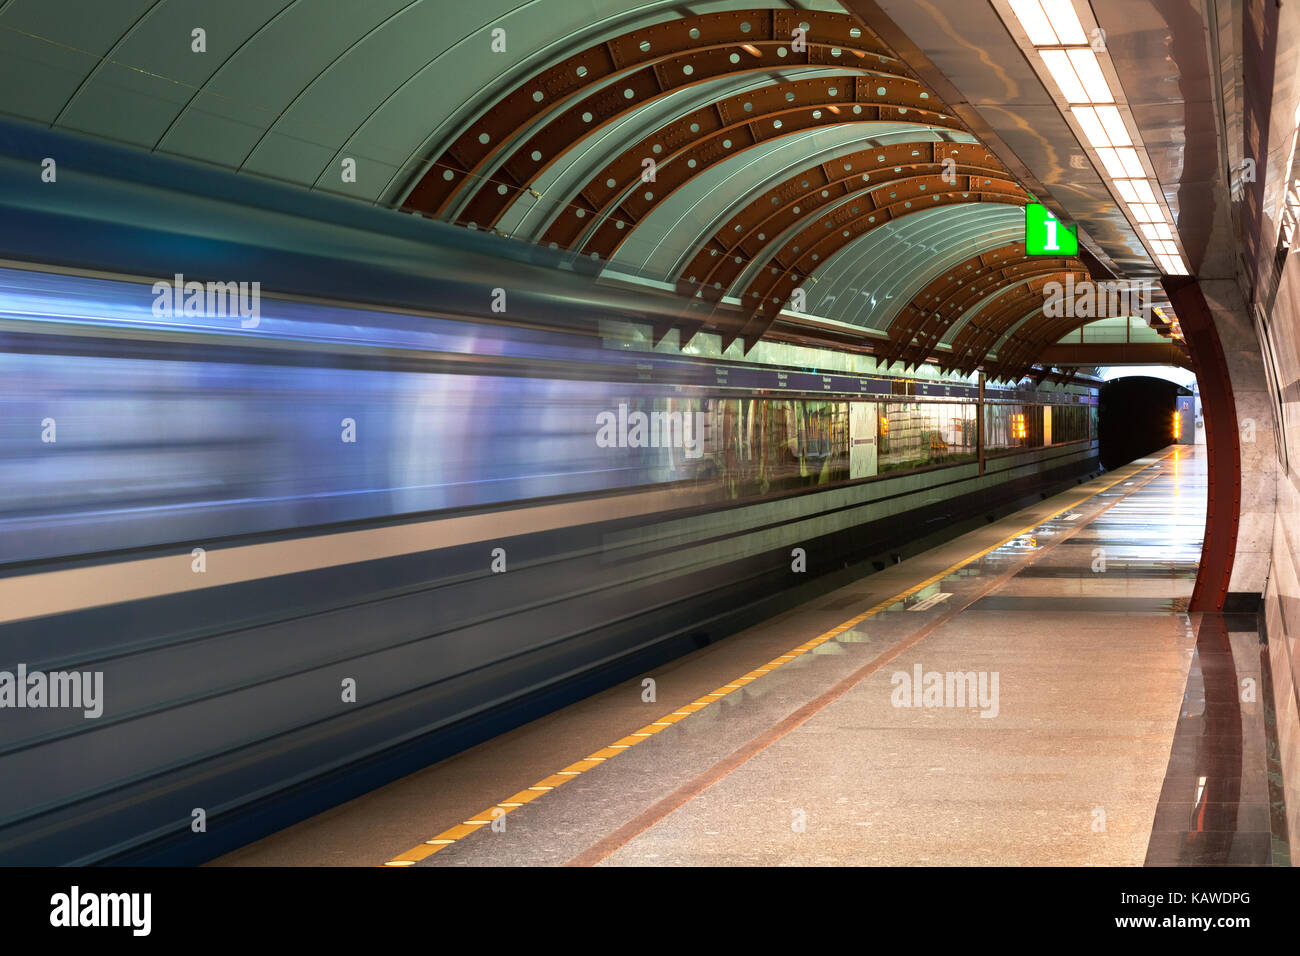 Subway station. Diagonal blue motion blur metro train background. Train departure. Fast underground subway train while hurtling fast with commuters on board. Stock Photo